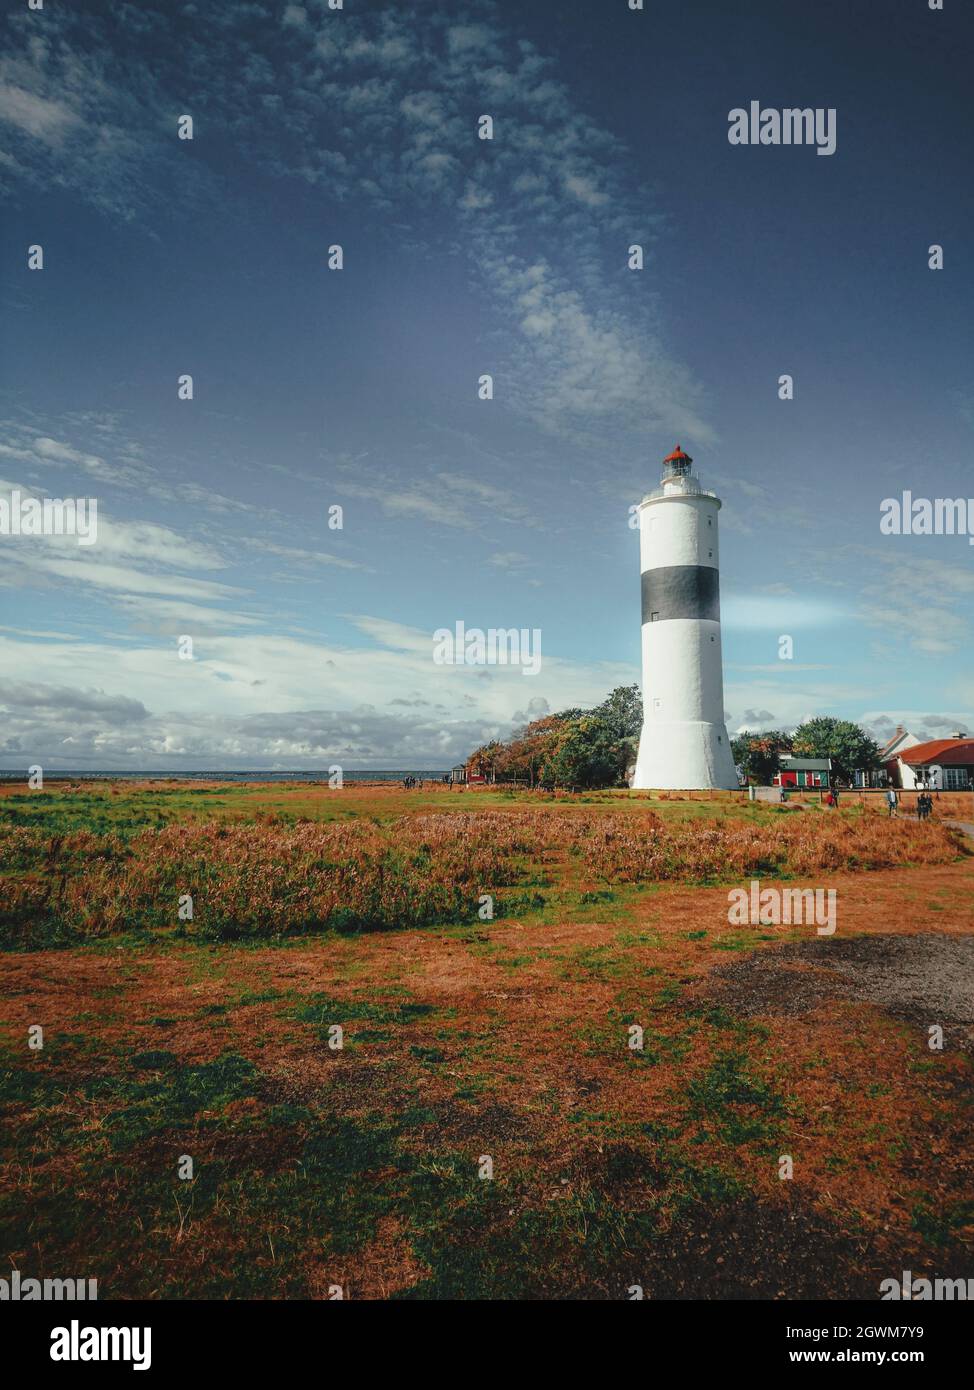 Lighthouse On Field By Building Against Sky Stock Photo